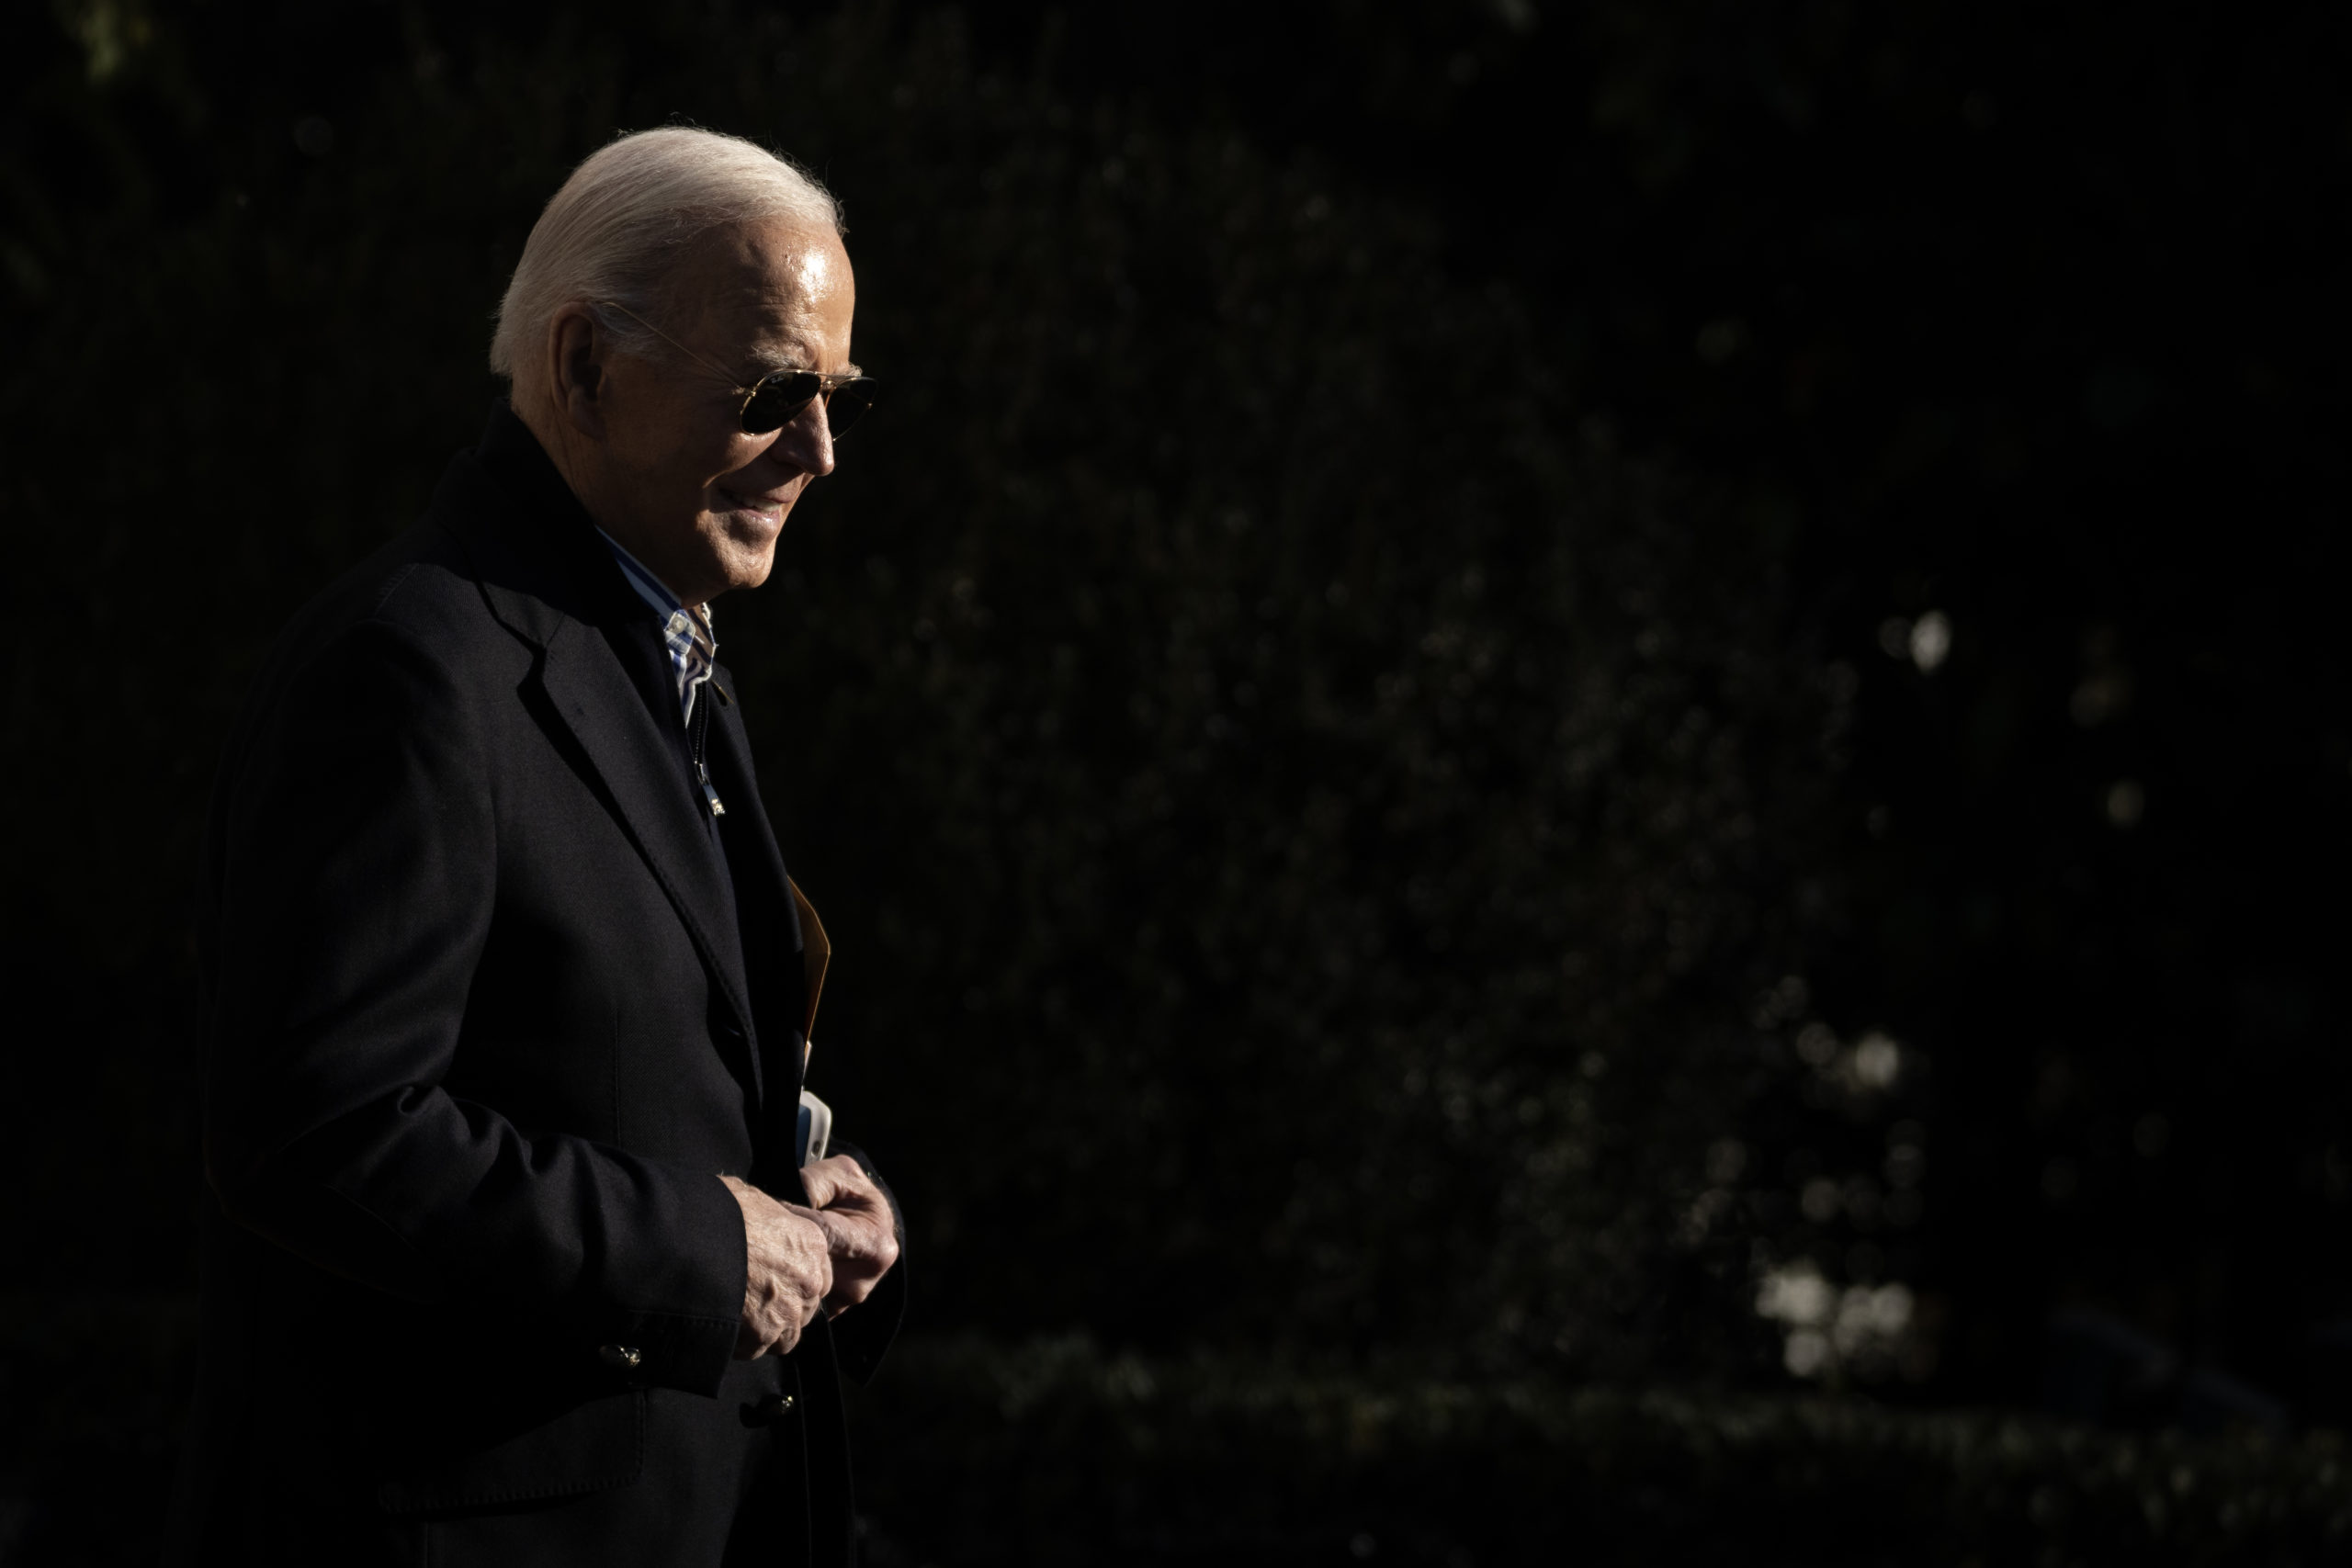 U.S. President Joe Biden departs the White House December 20, 2023 in Washington, DC. President Biden is traveling to Milwaukee and will deliver remarks at the Wisconsin Black Chamber of Commerce. (Photo by Drew Angerer/Getty Images)